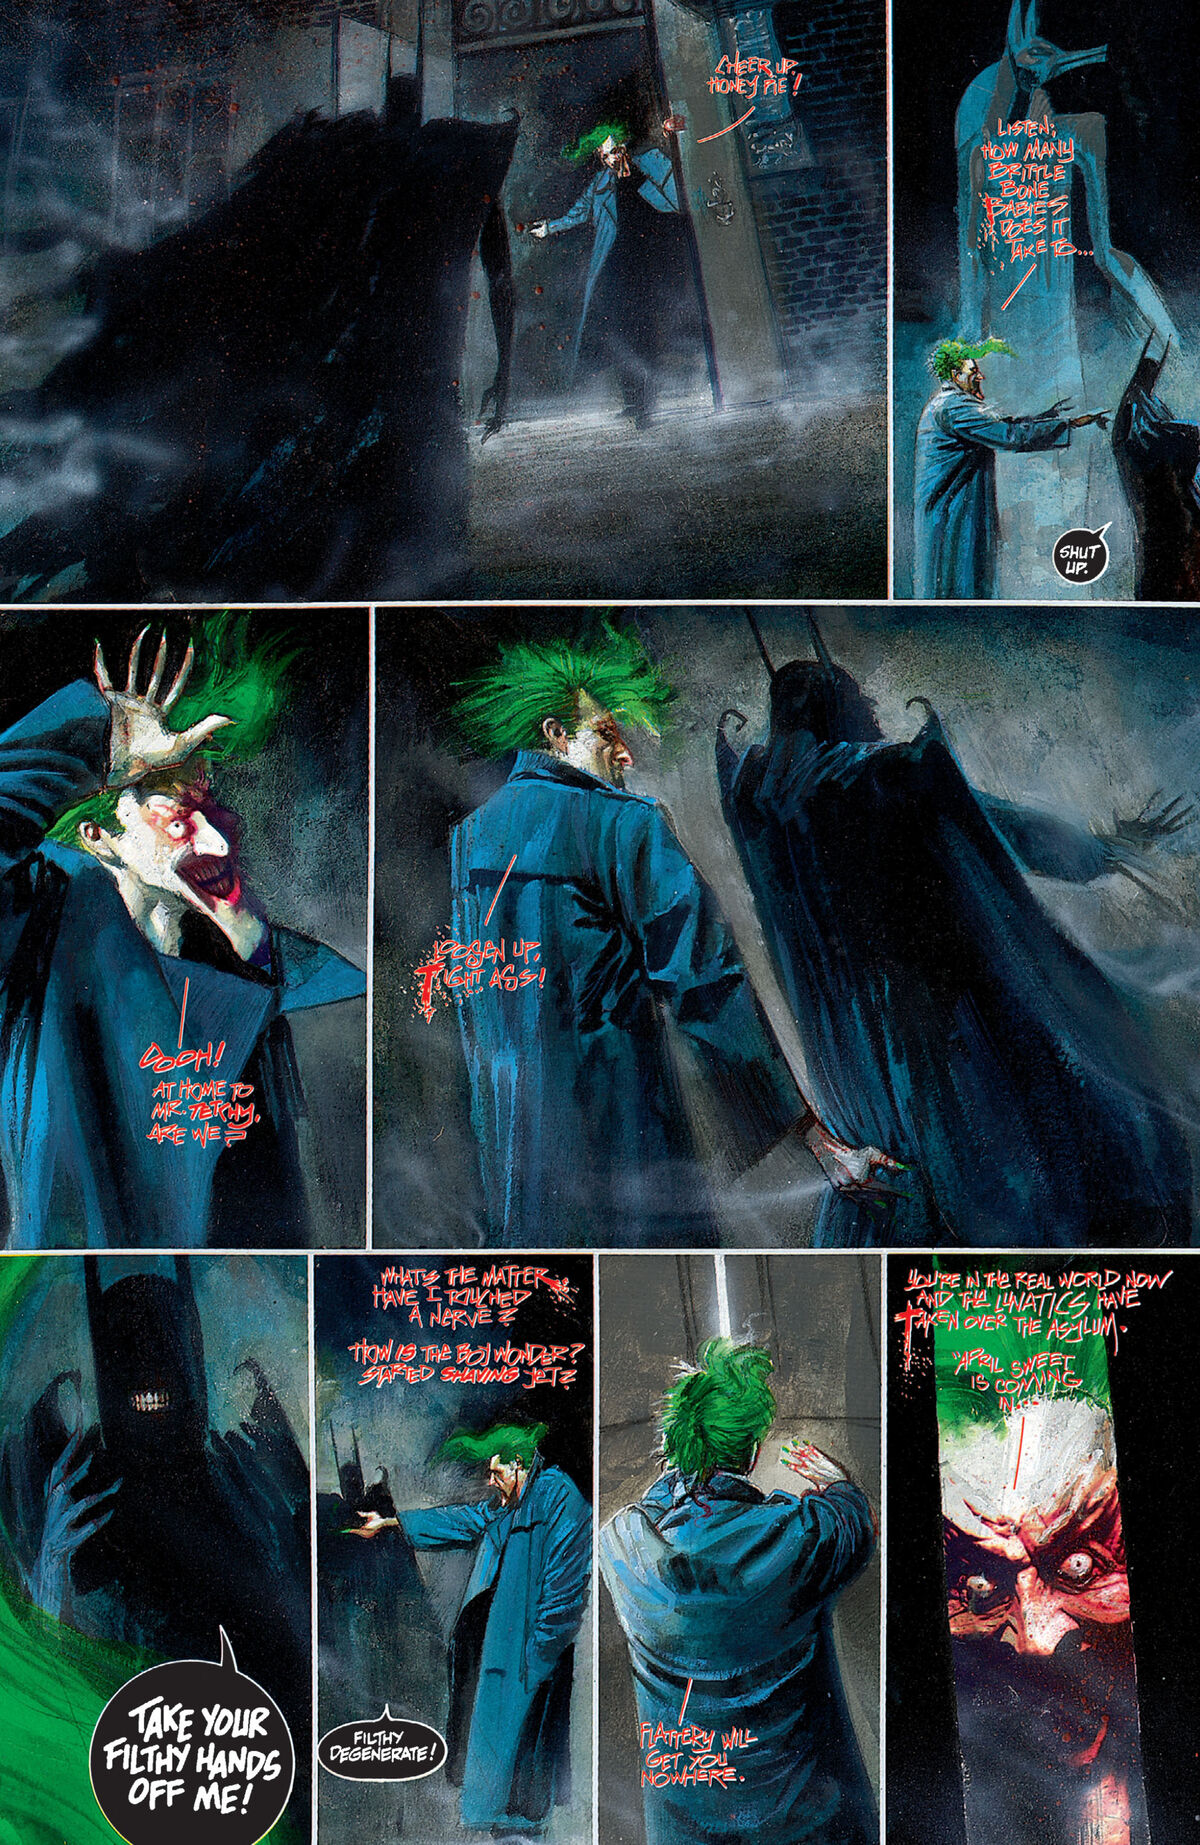 Batman confronts the Joker in &quot;Arkham Asylum: A Serious House on Serious Earth&quot;